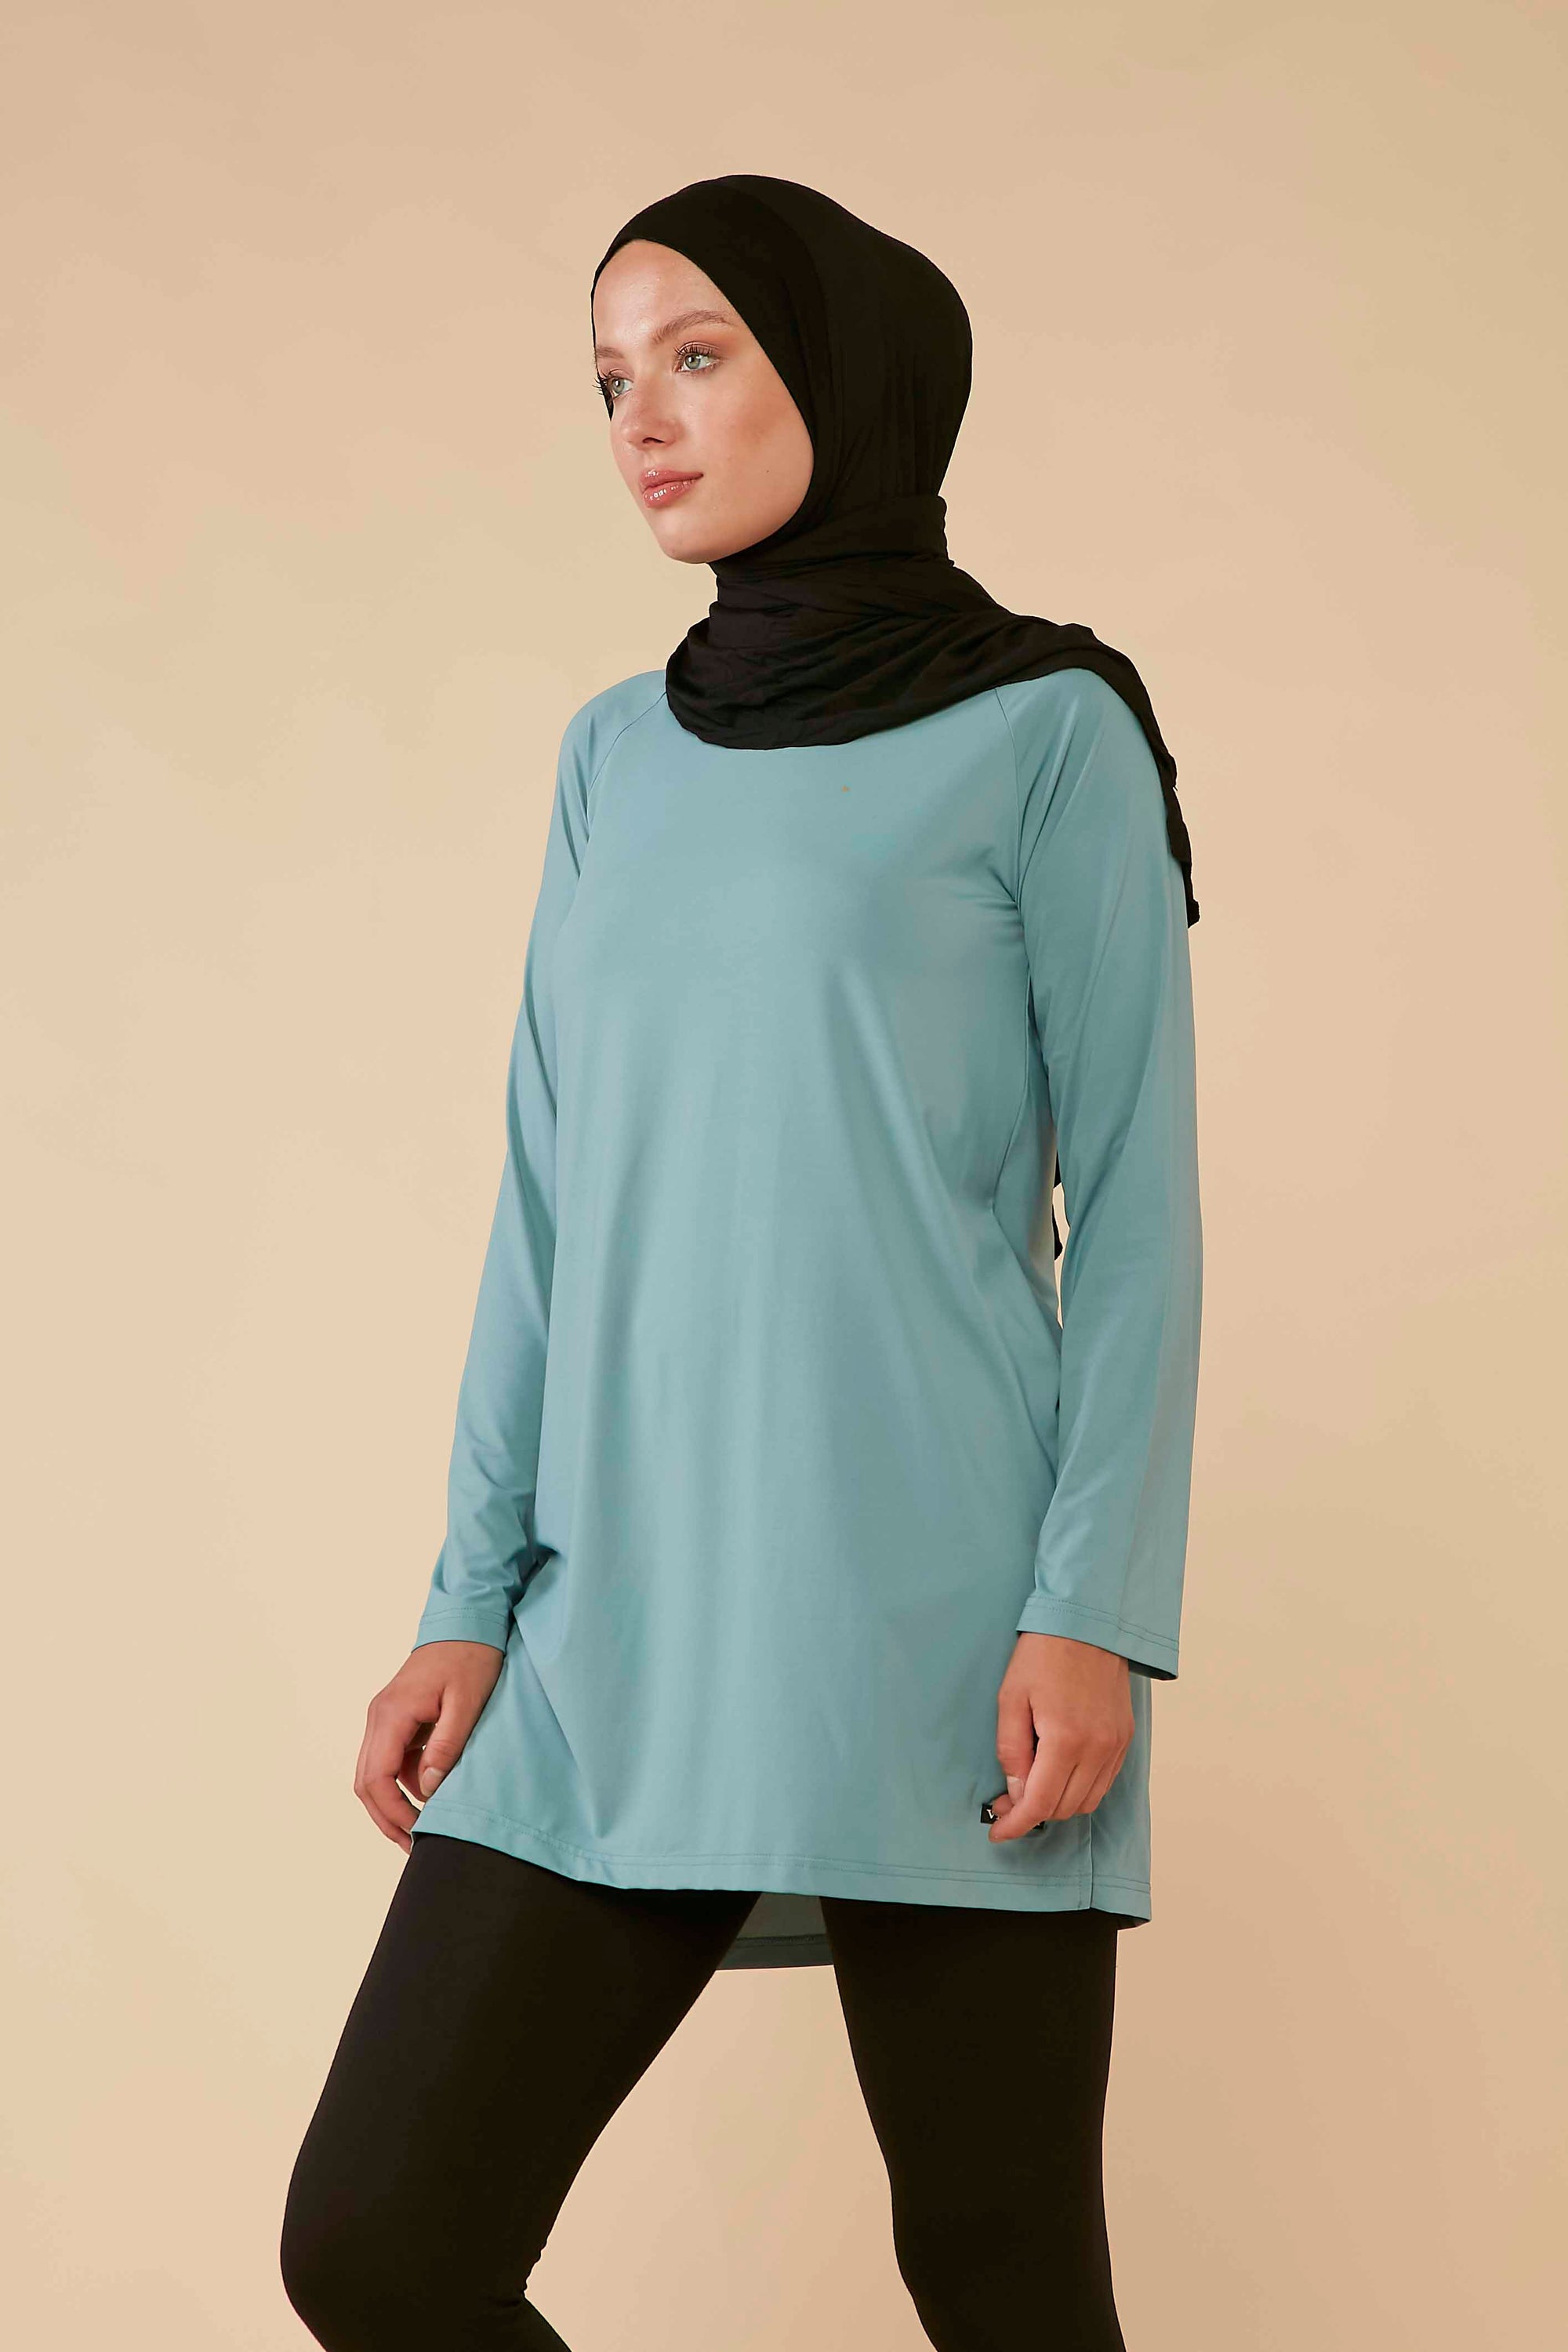 Isabella Modest Athletic Top - Soft Blue